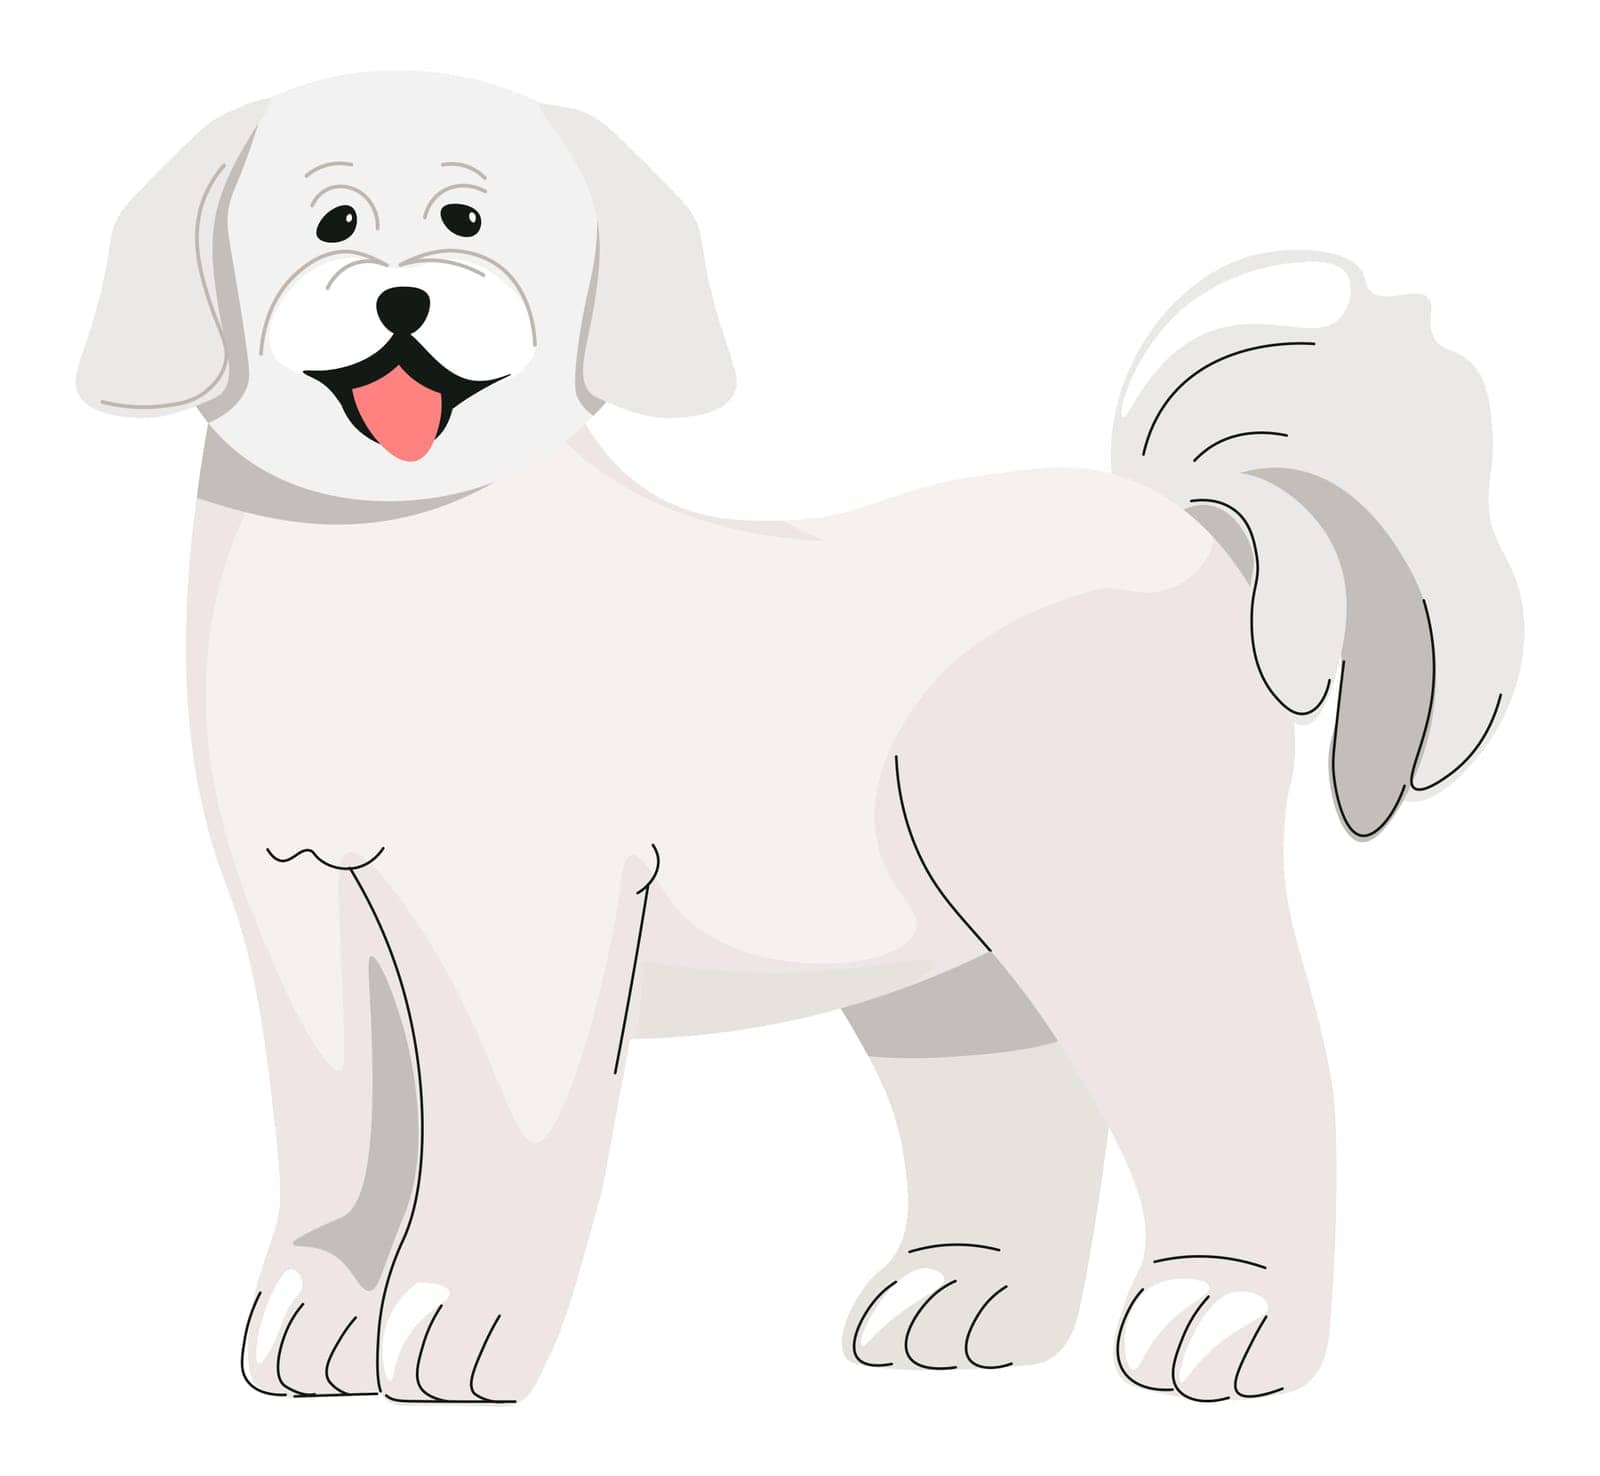 Poodle puppy, small dog canine animal pets vector by Sonulkaster